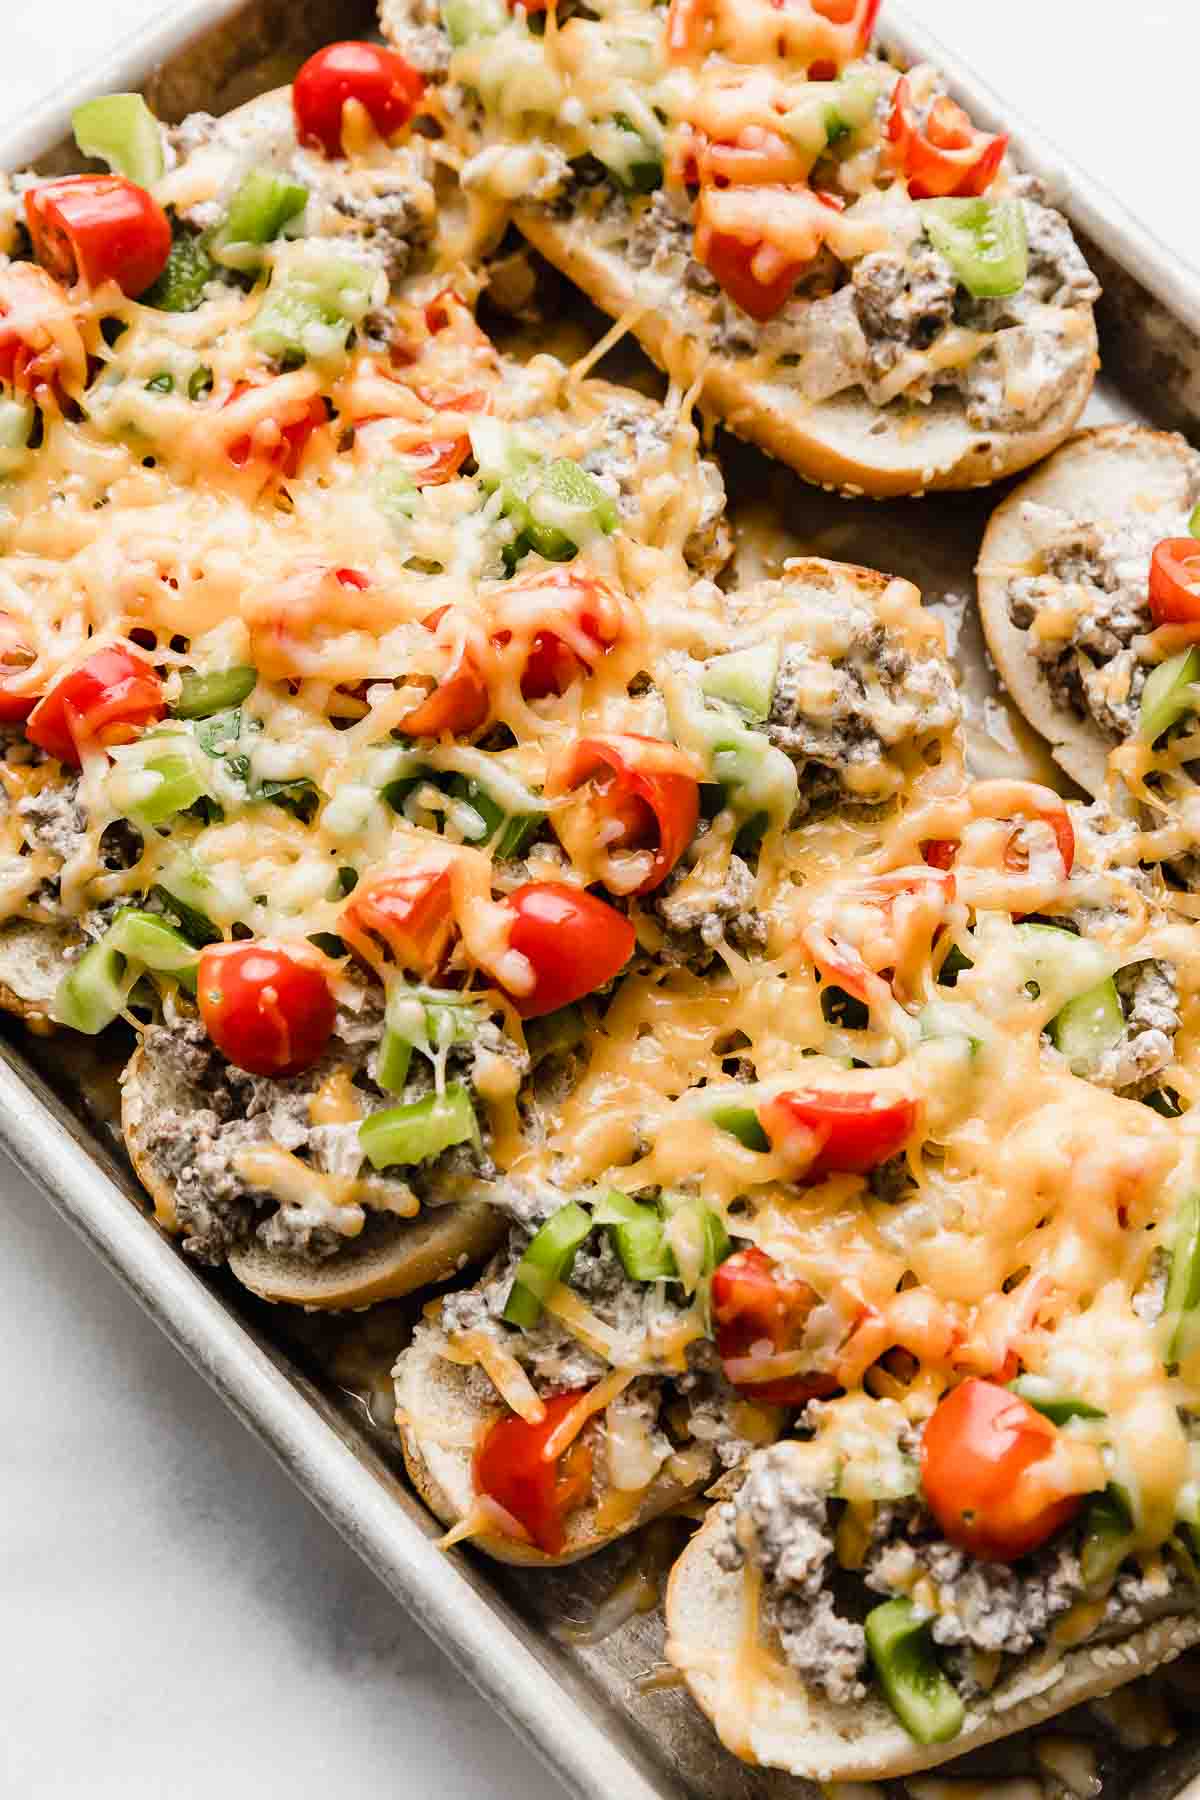 Beef Stroganoff Sandwiches on a baking sheet, each hoagie bun topped with ground beef mixture, diced tomatoes and green peppers, and melted cheddar cheese.